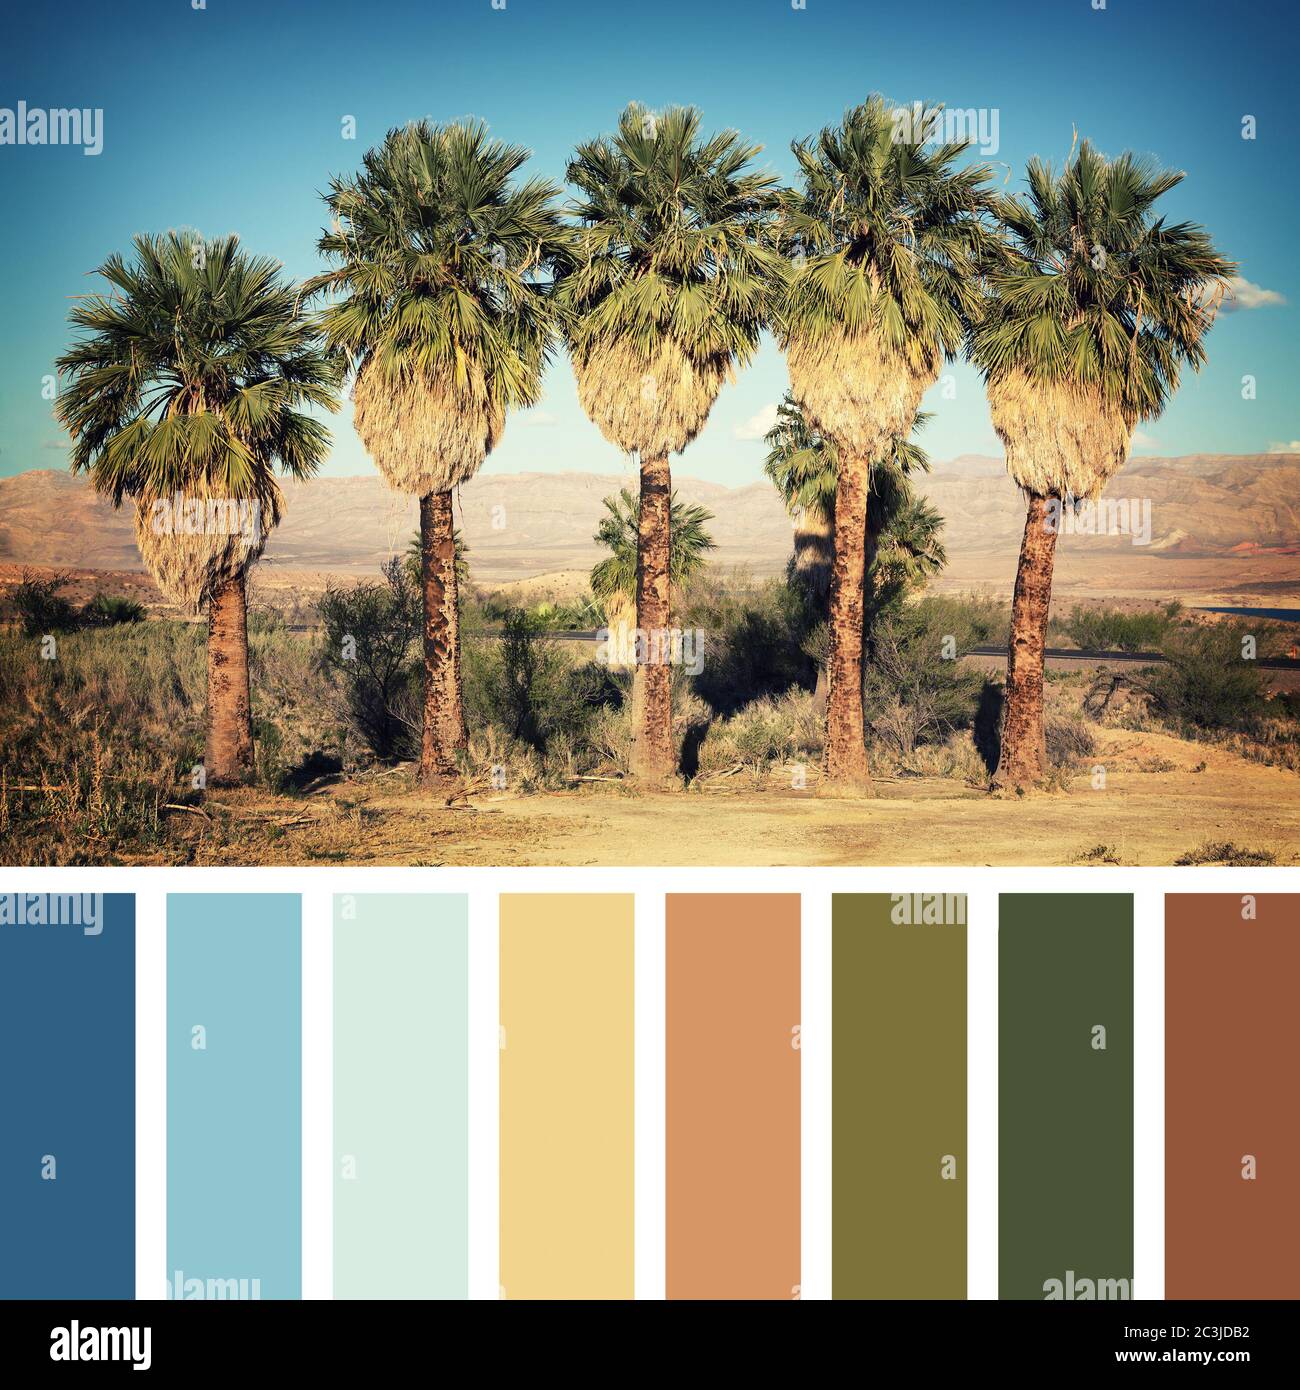 palm-trees-in-the-desert-nevada-usa-instagram-retro-style-processing-in-a-colour-palette-with-complimentary-colour-swatches-2C3JDB2.jpg